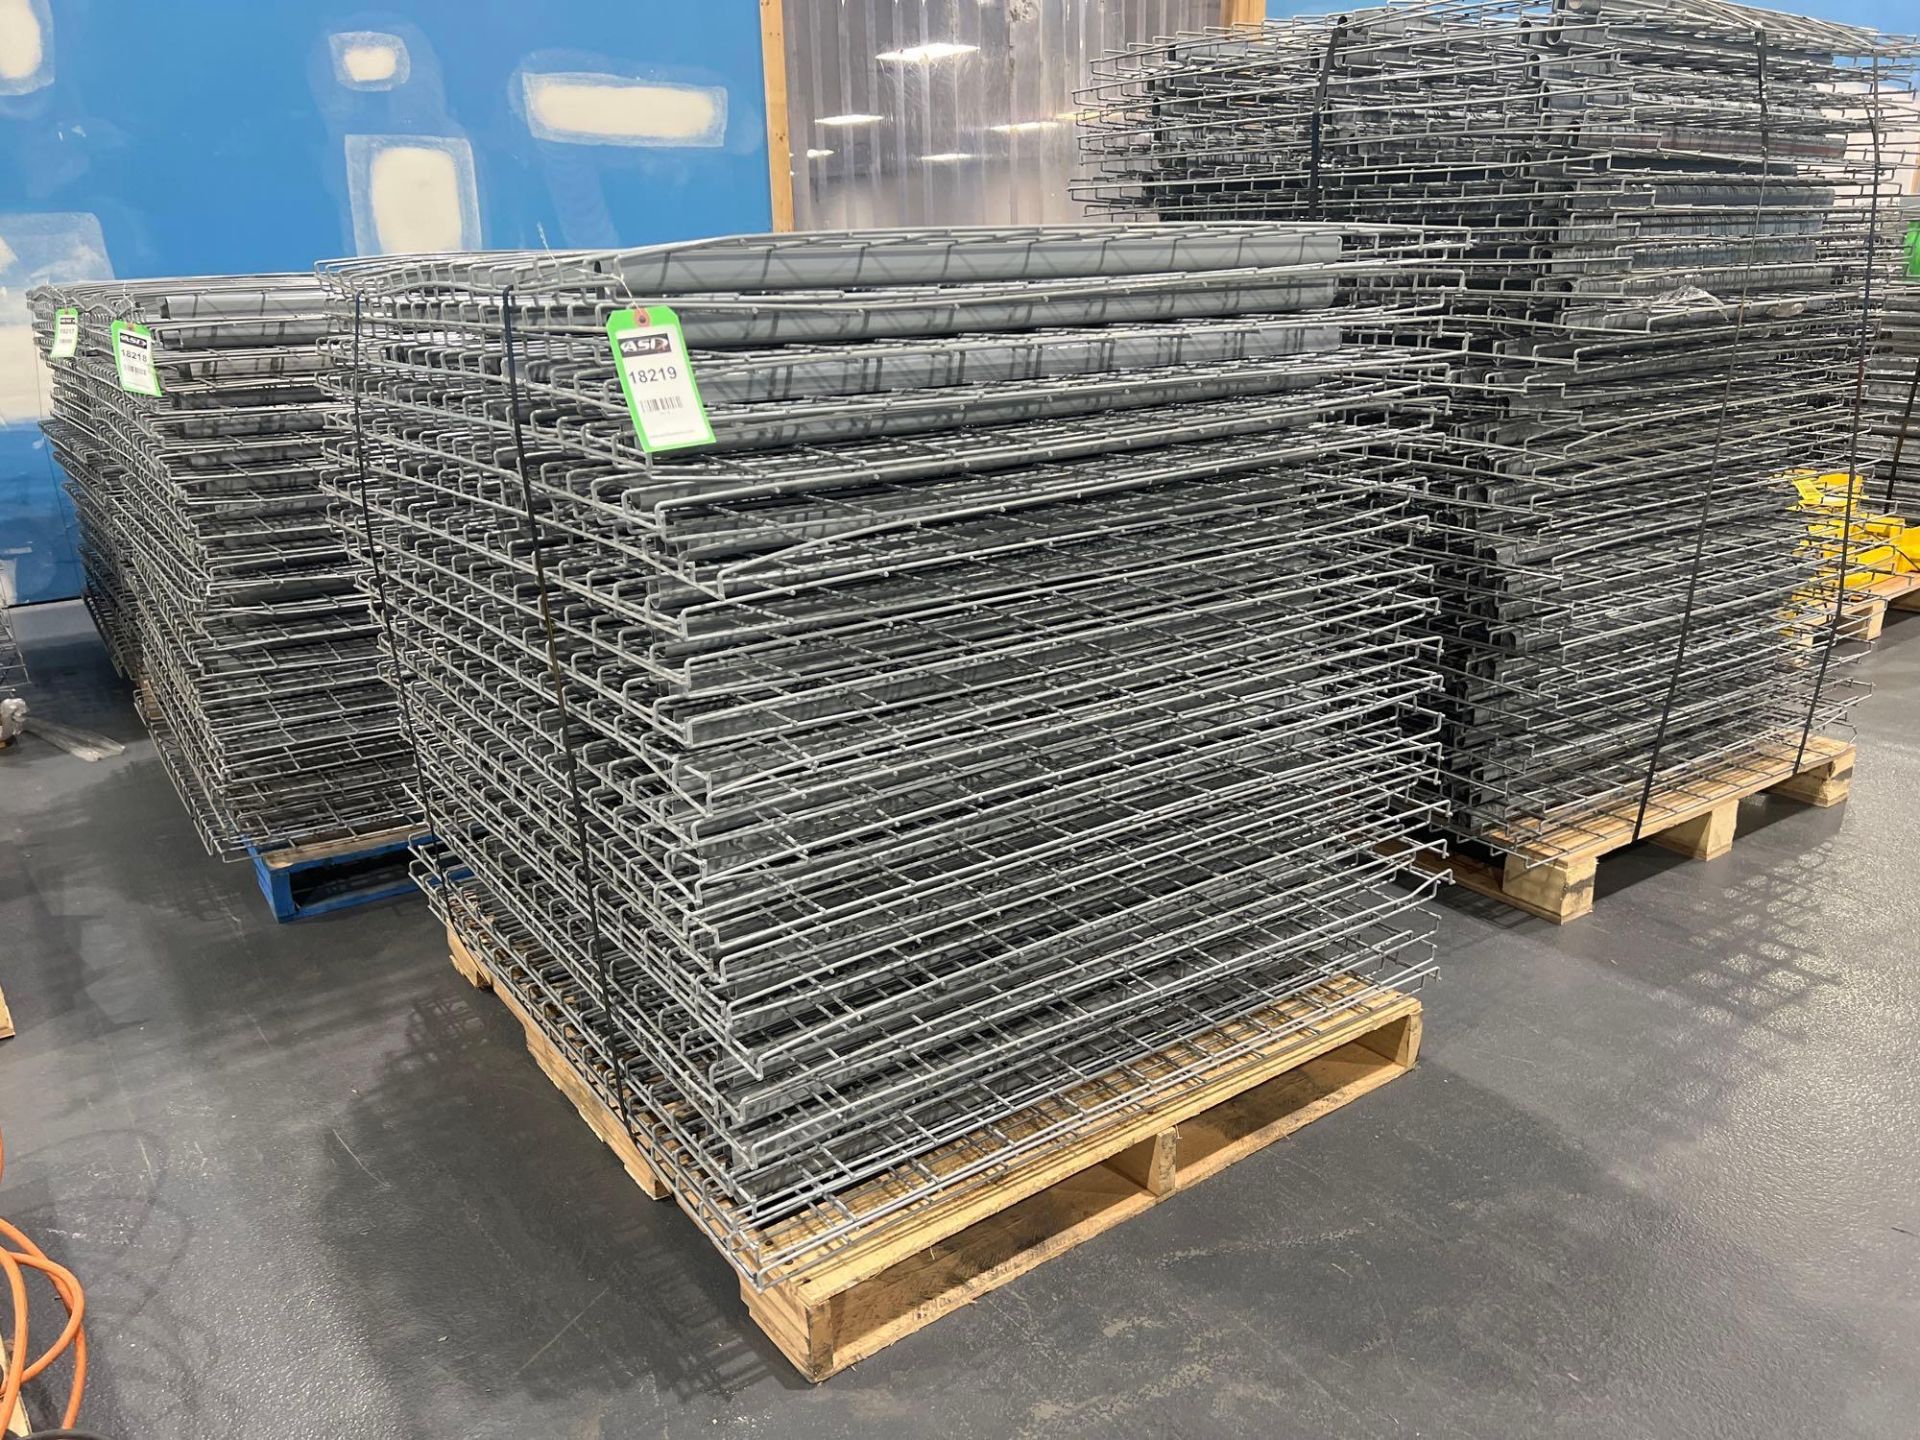 PALLET OF APPROX. 42 WIRE GRATES FOR PALLET RACKING, APPROX. DIMENSIONS 43" X 45" - Image 3 of 4